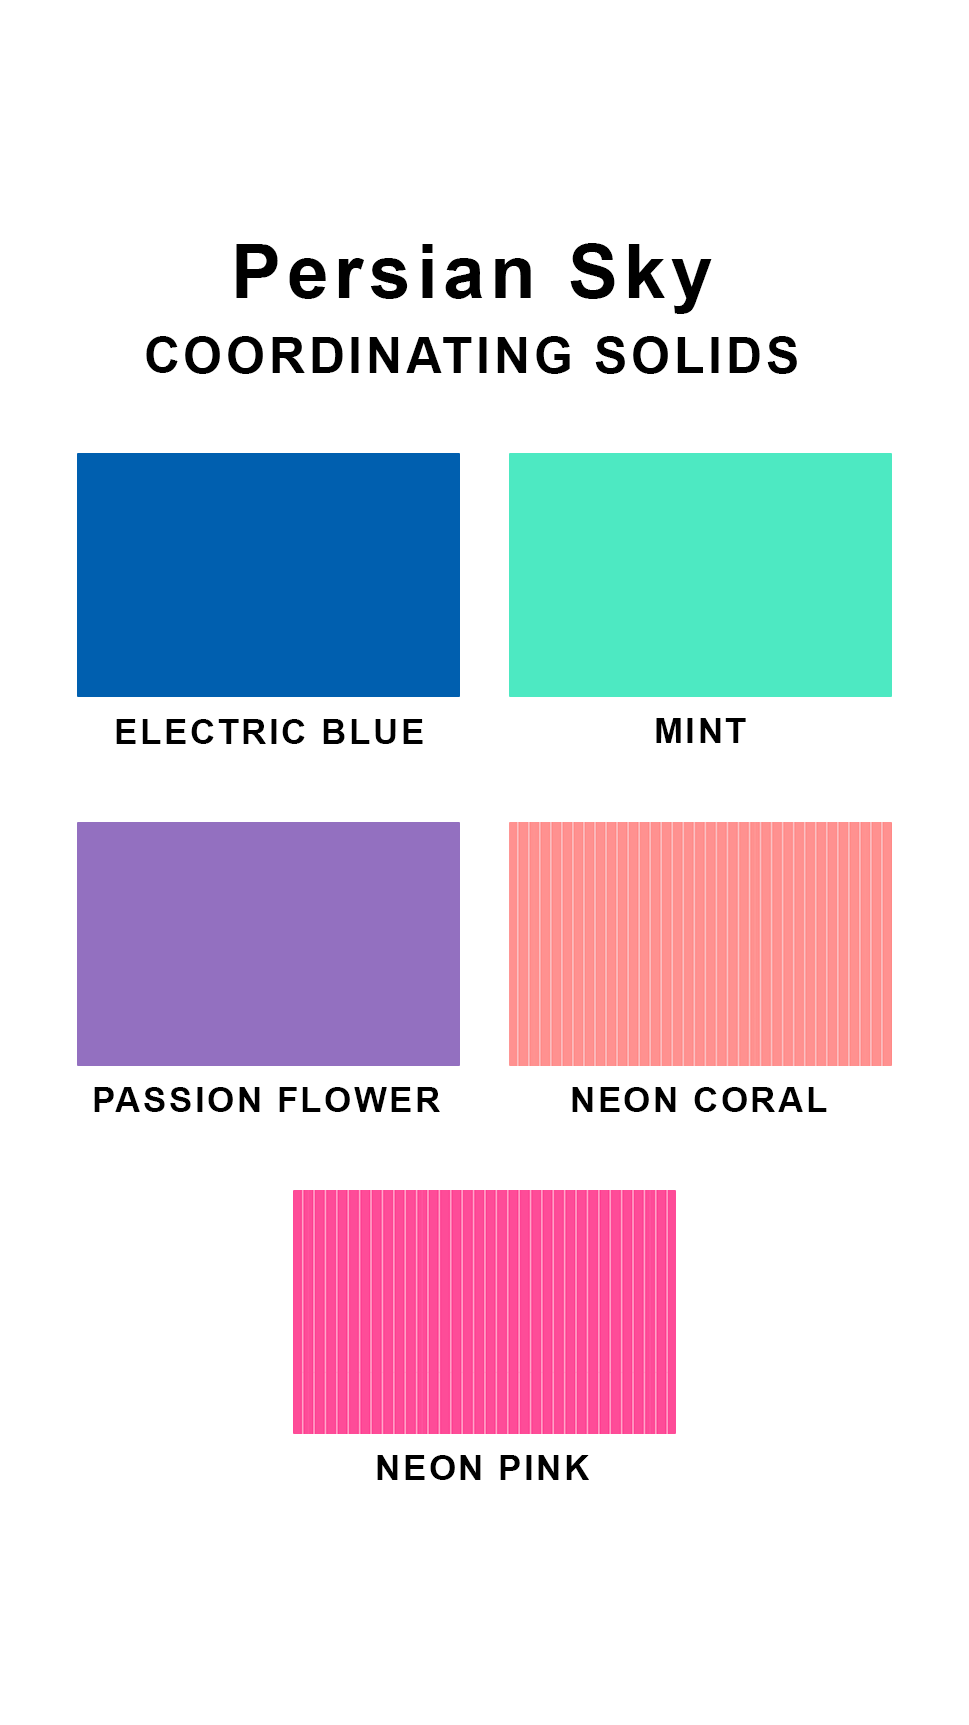 Coordinating solids chart for Sunsets Persian Sky swimsuit print: Electric Blue, Mint, Passion Flower, Neon Coral, and Neon Pink